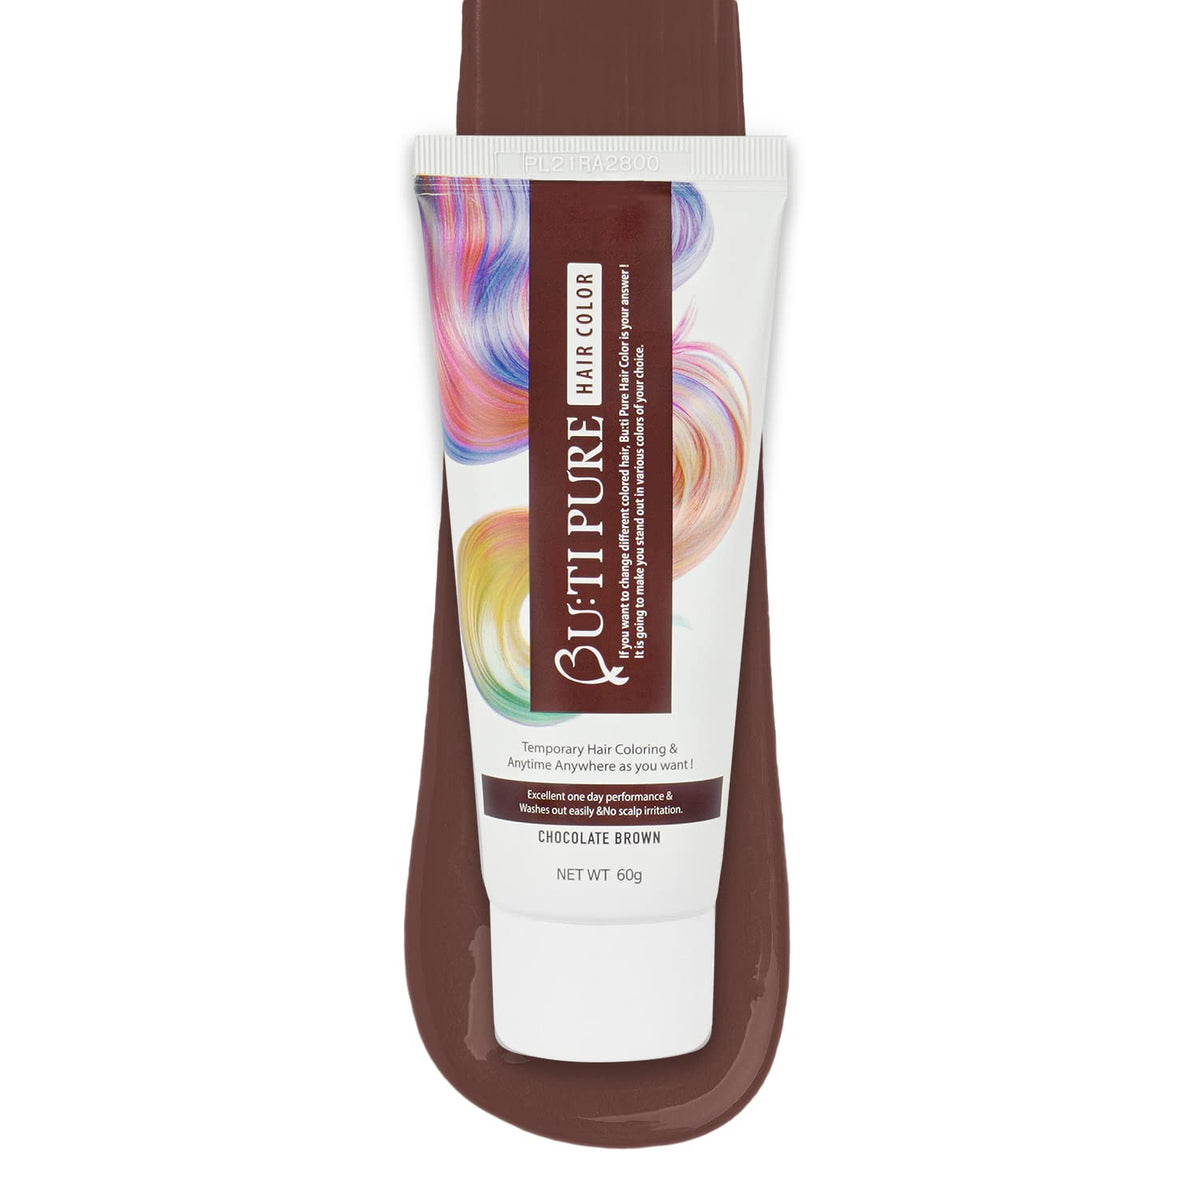 ButiPure Chocolate Brown One Day Hair Color (60g) Buti Pure